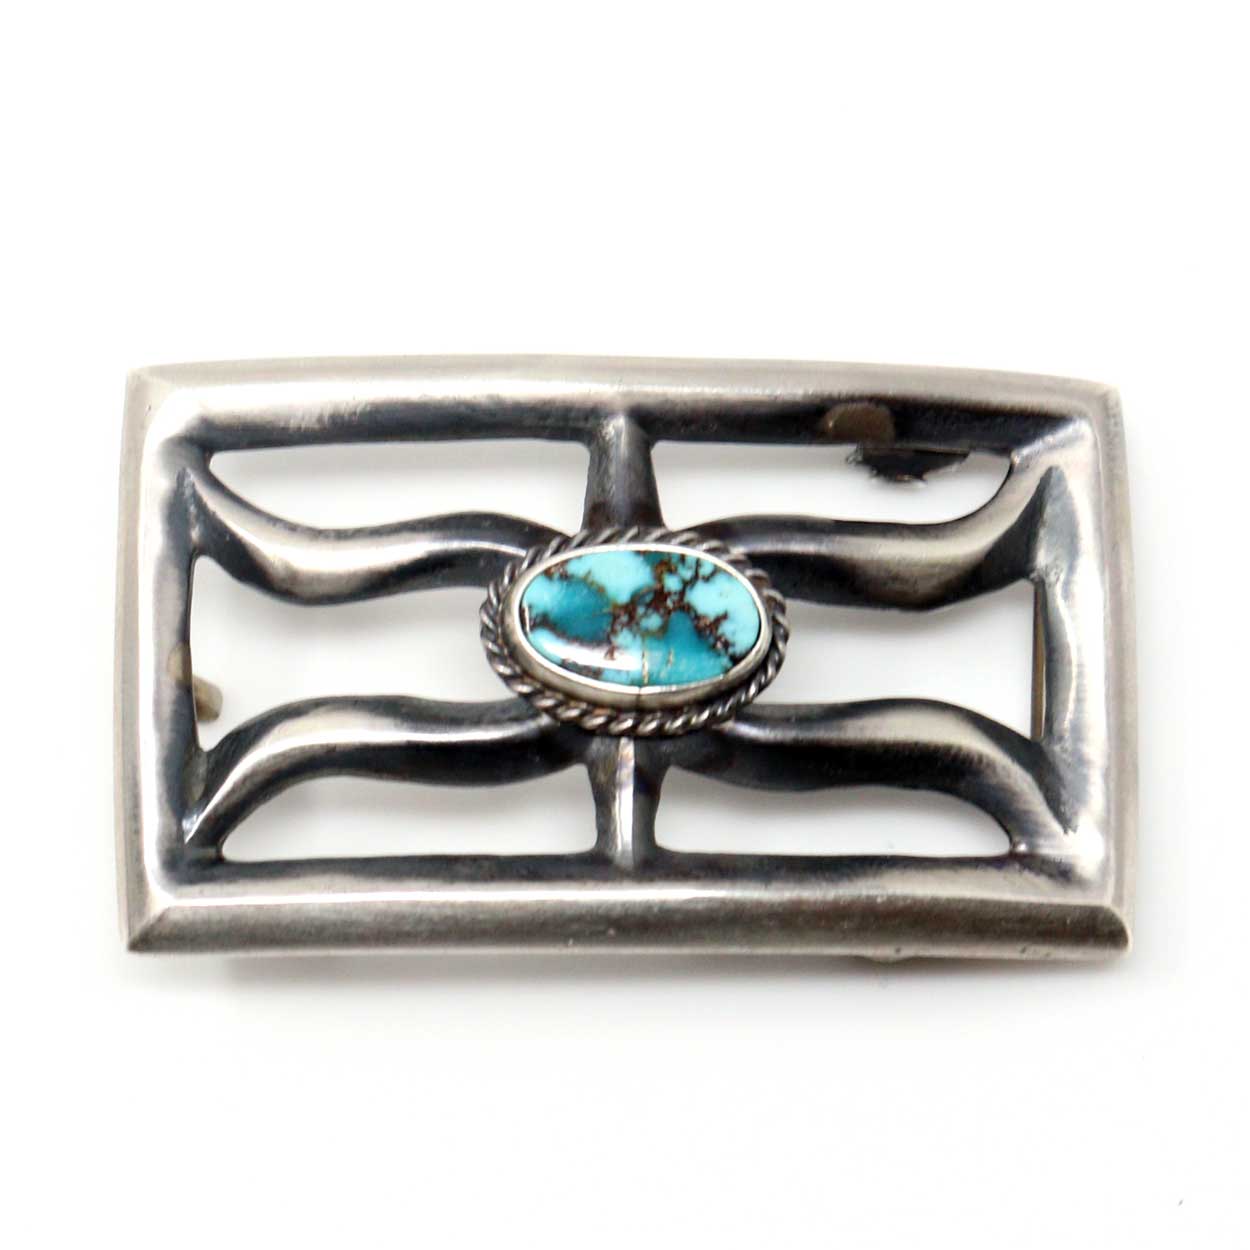 Turquoise & Silver Cast Buckle by Bitsui